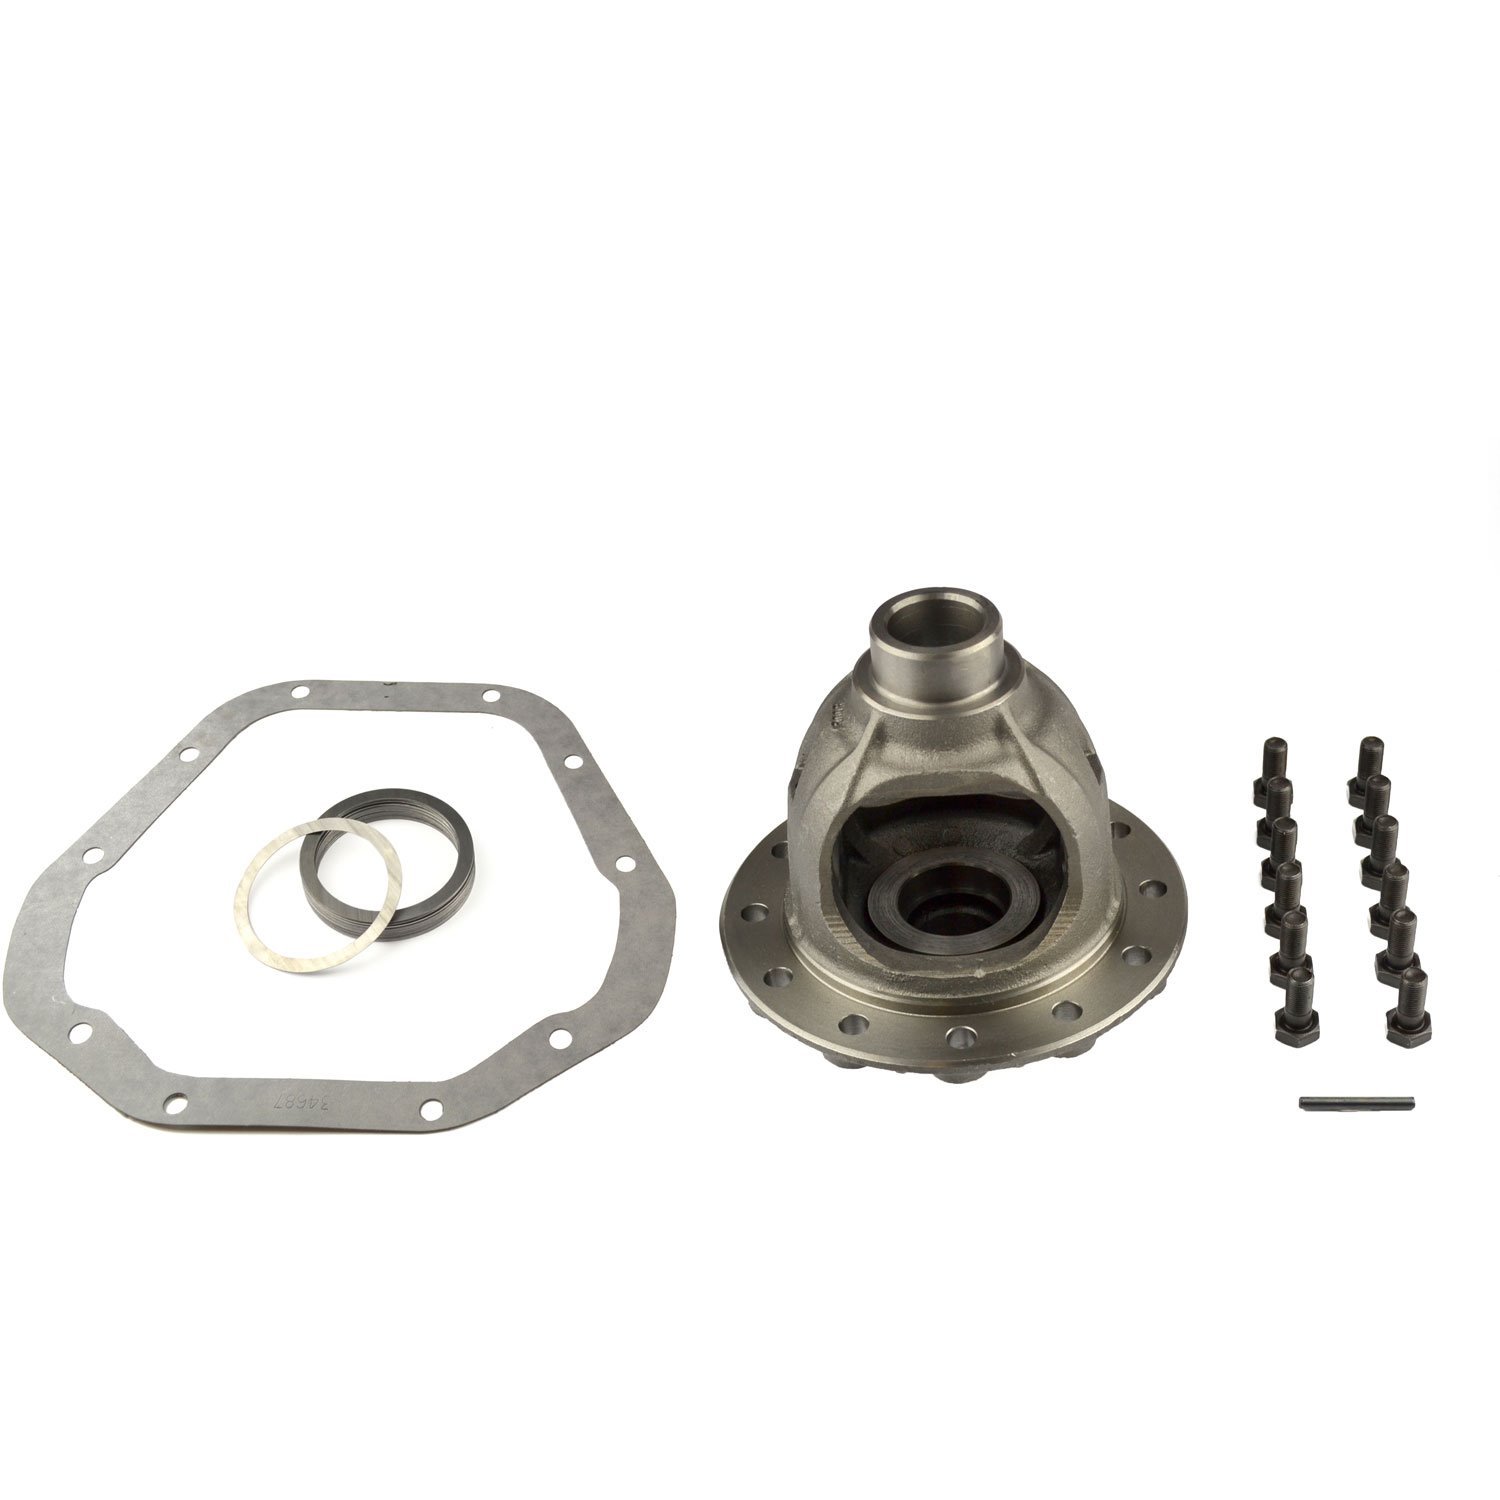 706041X Differential Carrier Assembly - Open Fits Dana